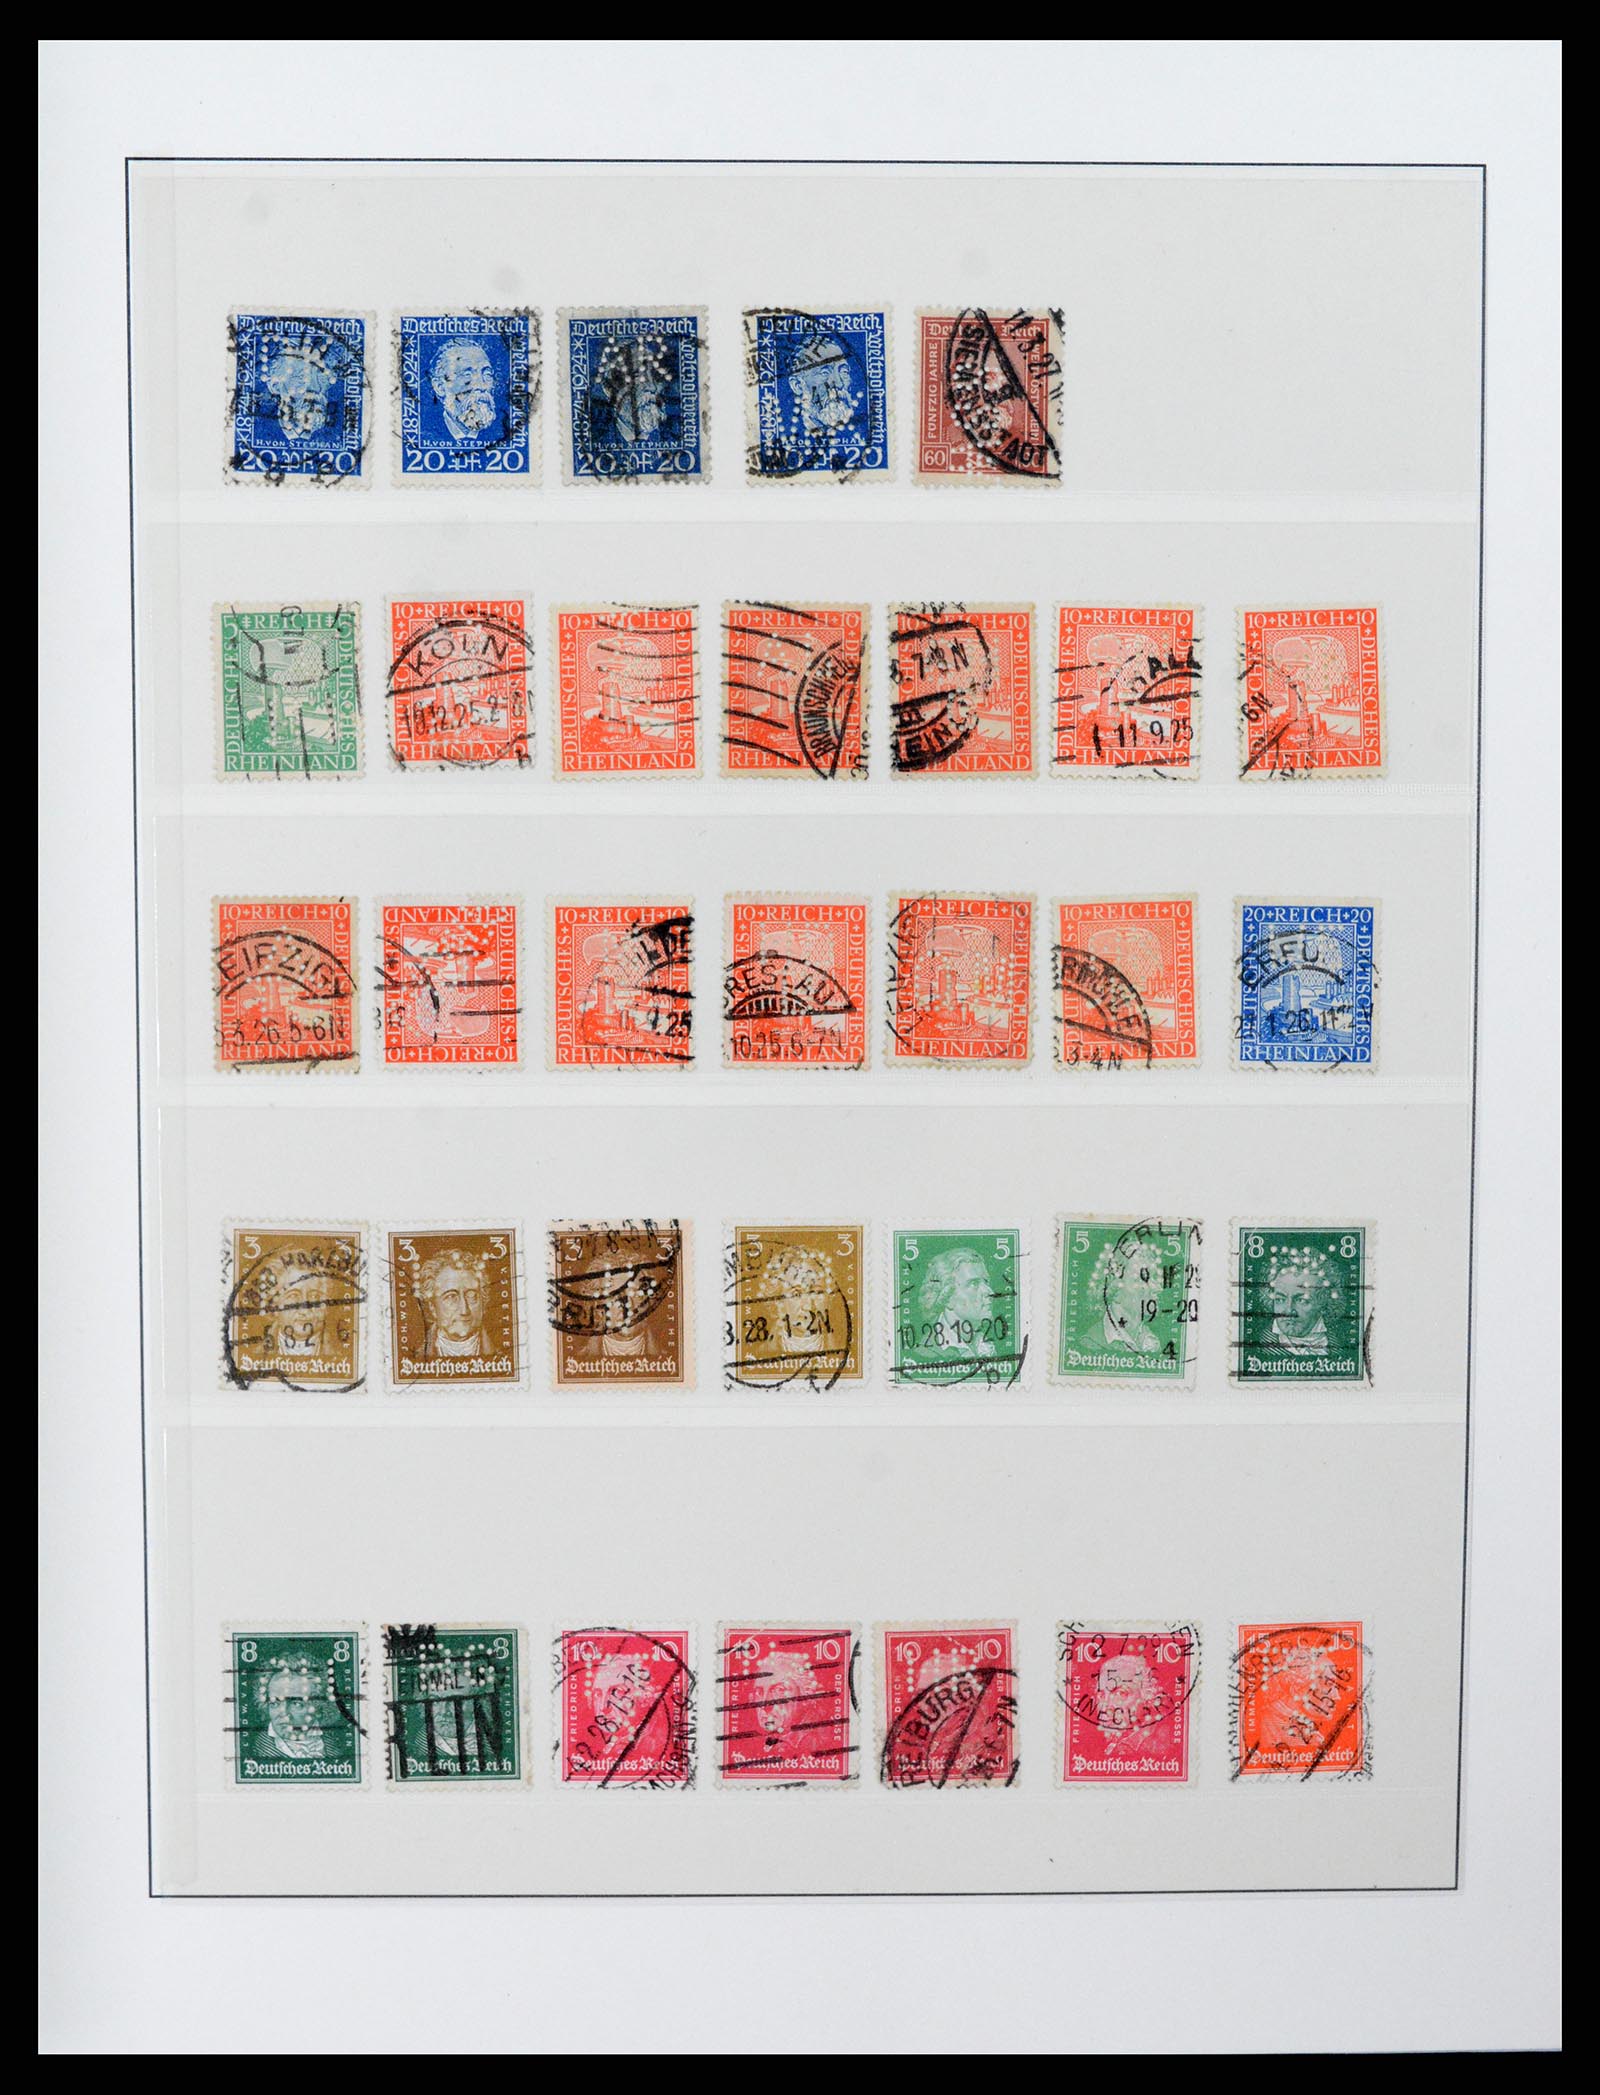 37317 023 - Stamp collection 37317 World perfins 1880-1960.